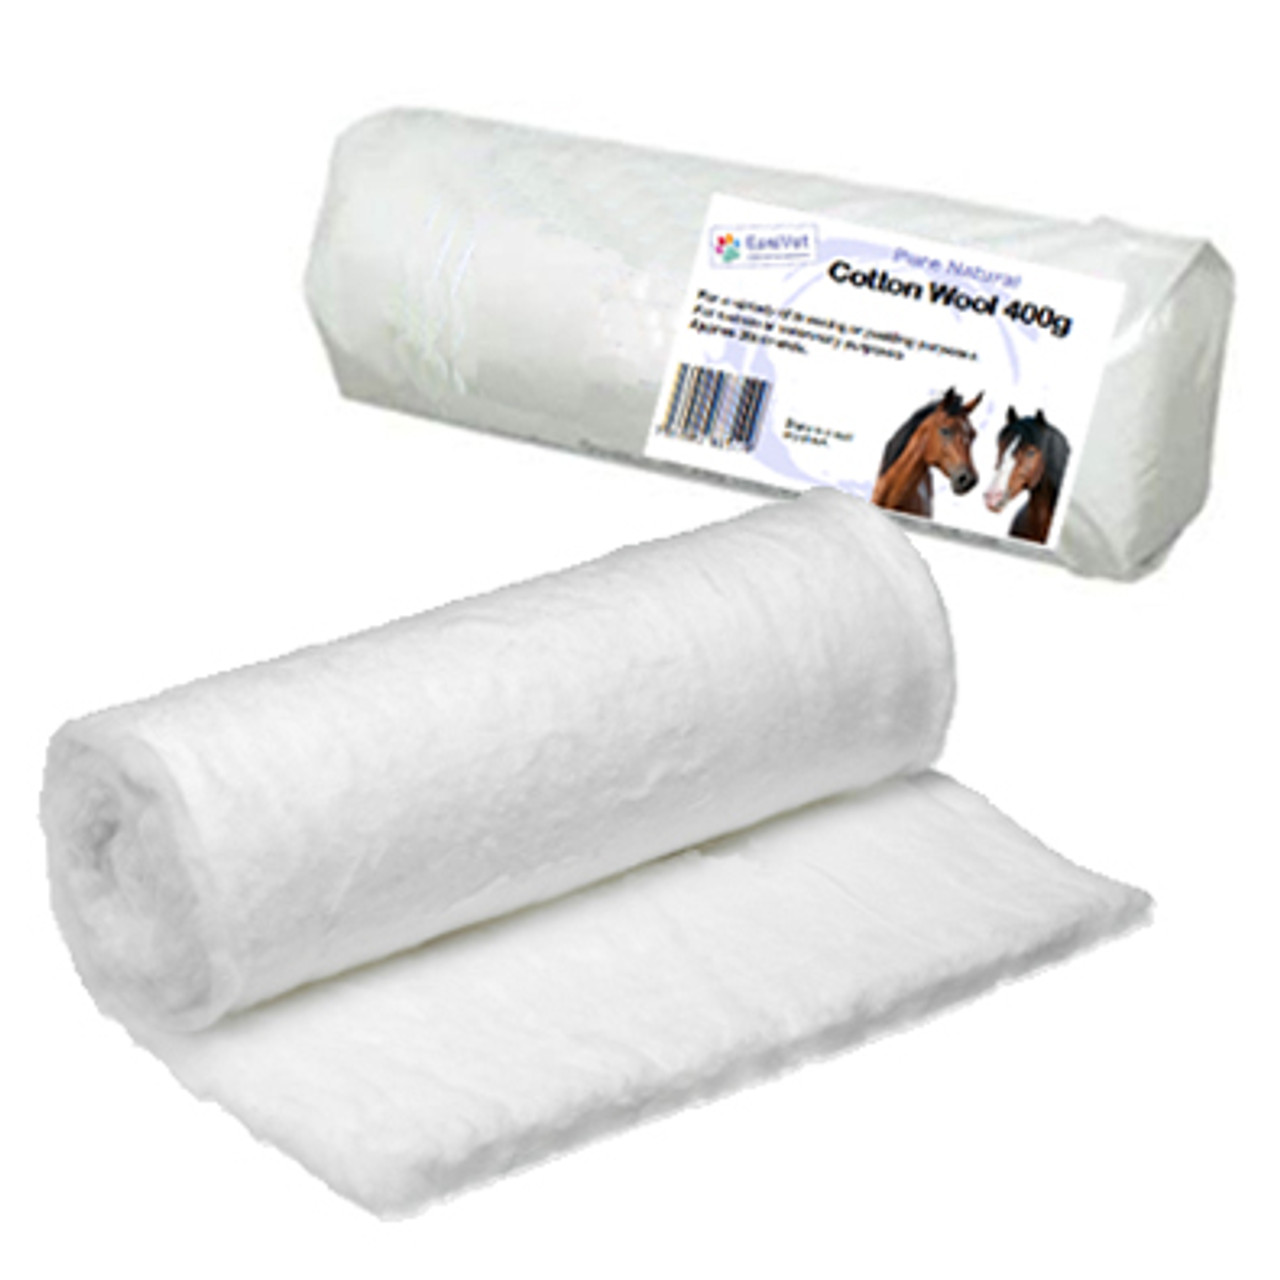 Super Absorbent Cotton Wool Roll – Essential Animal Supplies